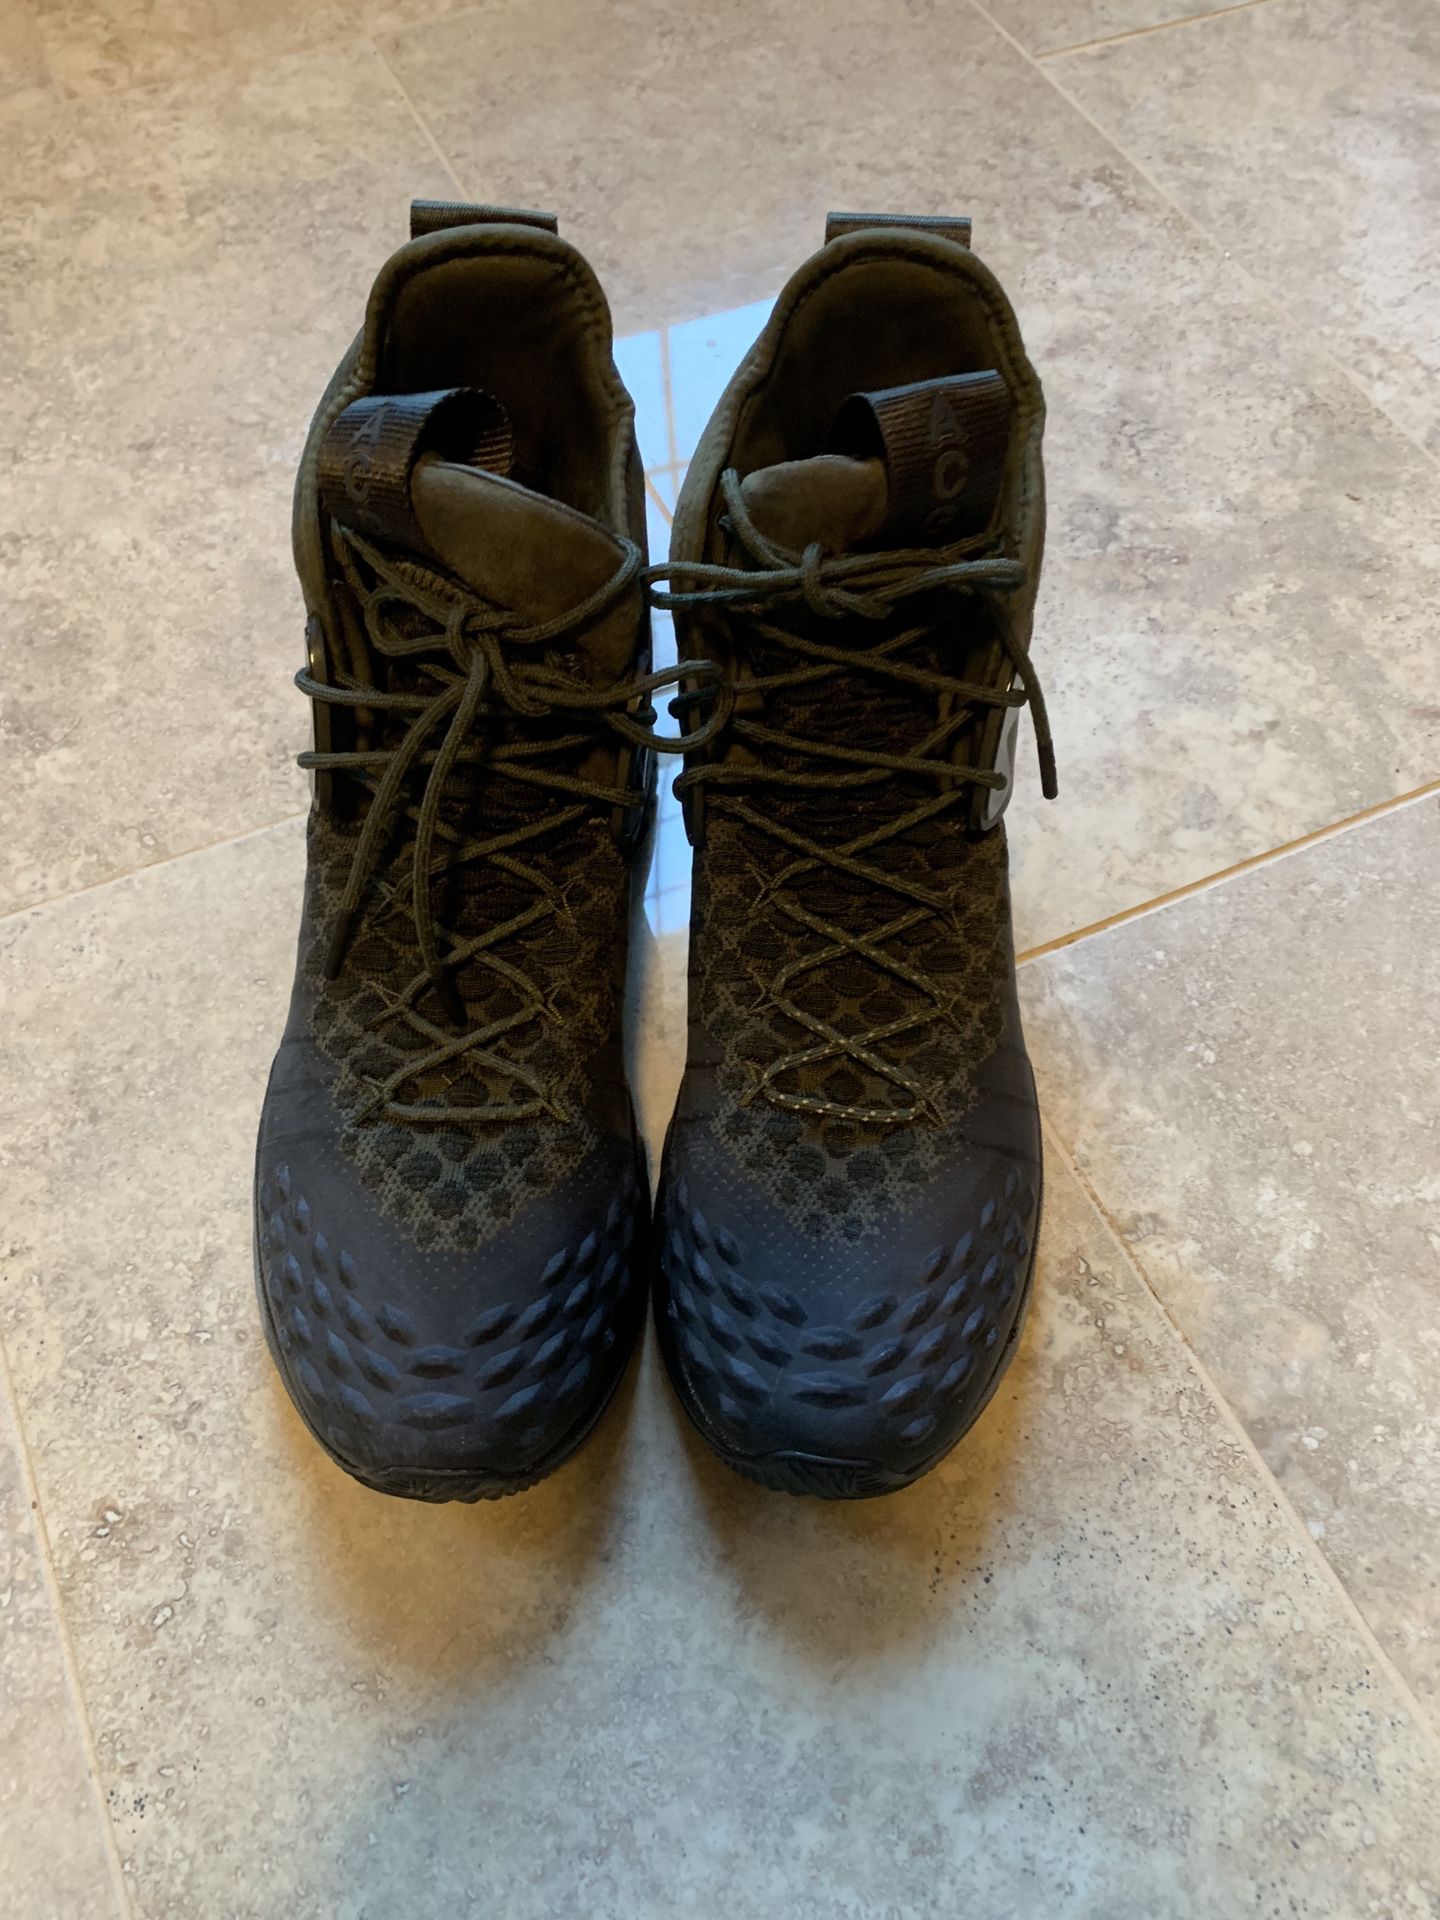 Nike Zoom Tallac Flyknit for Sale in Graham, WA OfferUp